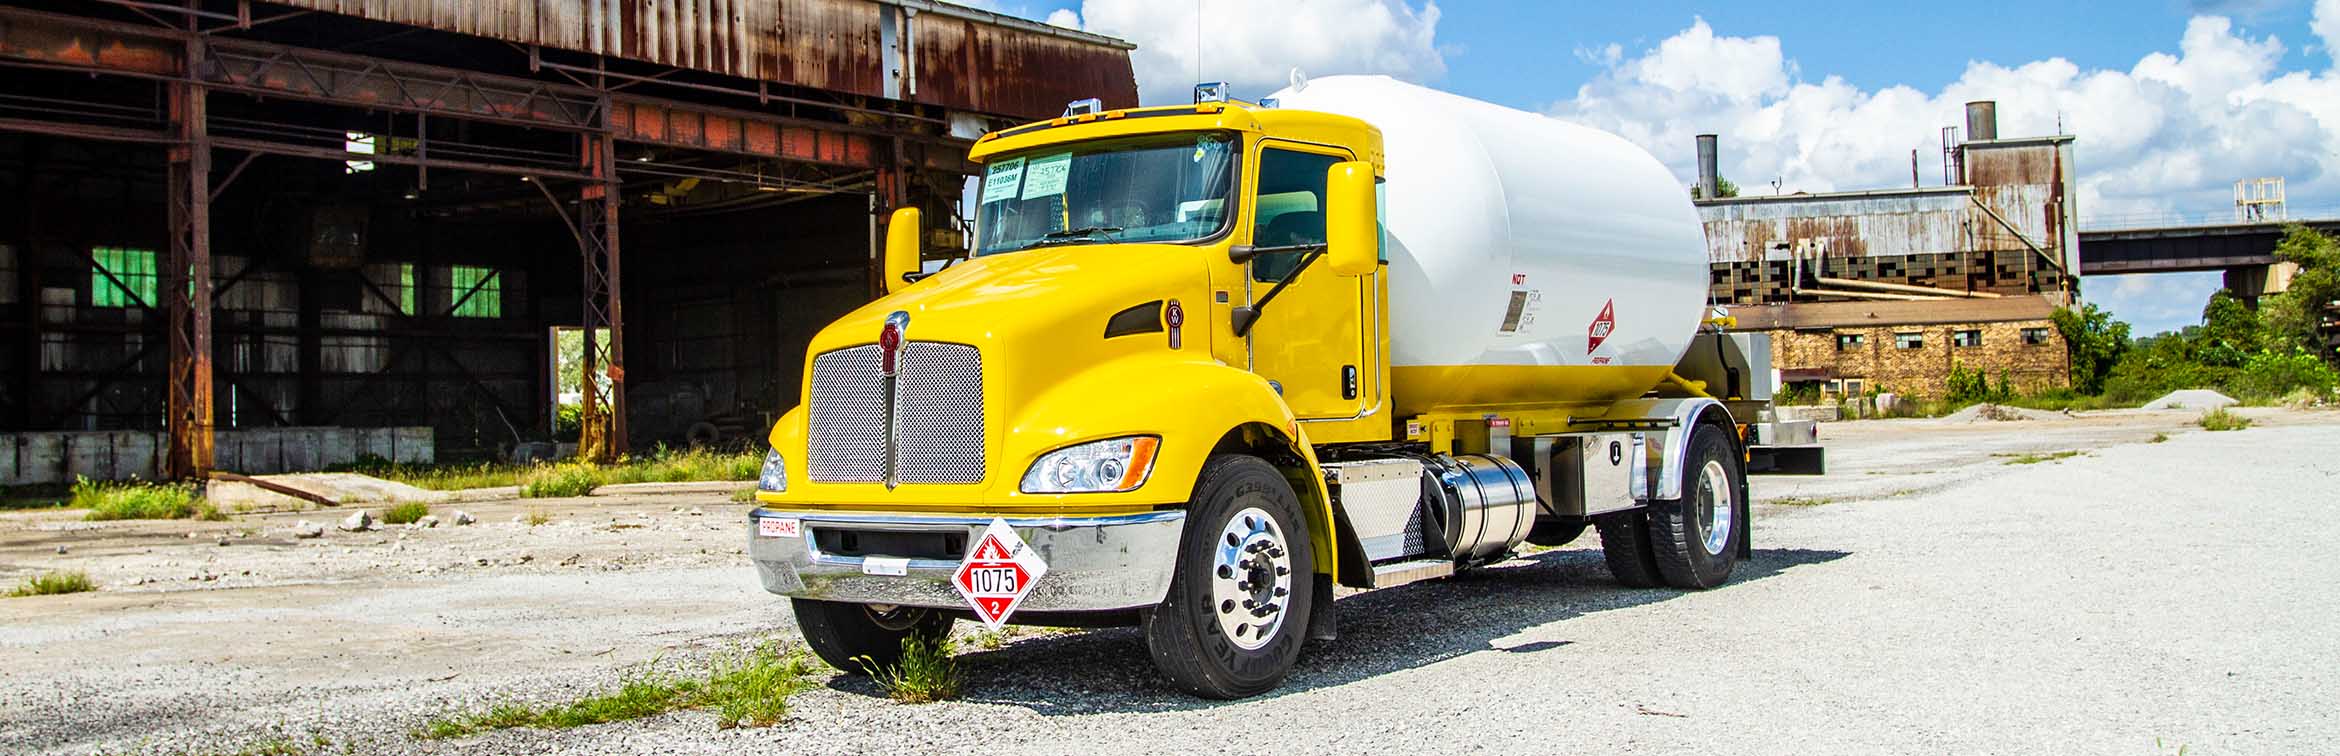 Propane Refined Fuel Equipment Everything To Know Before Buying Or Renting